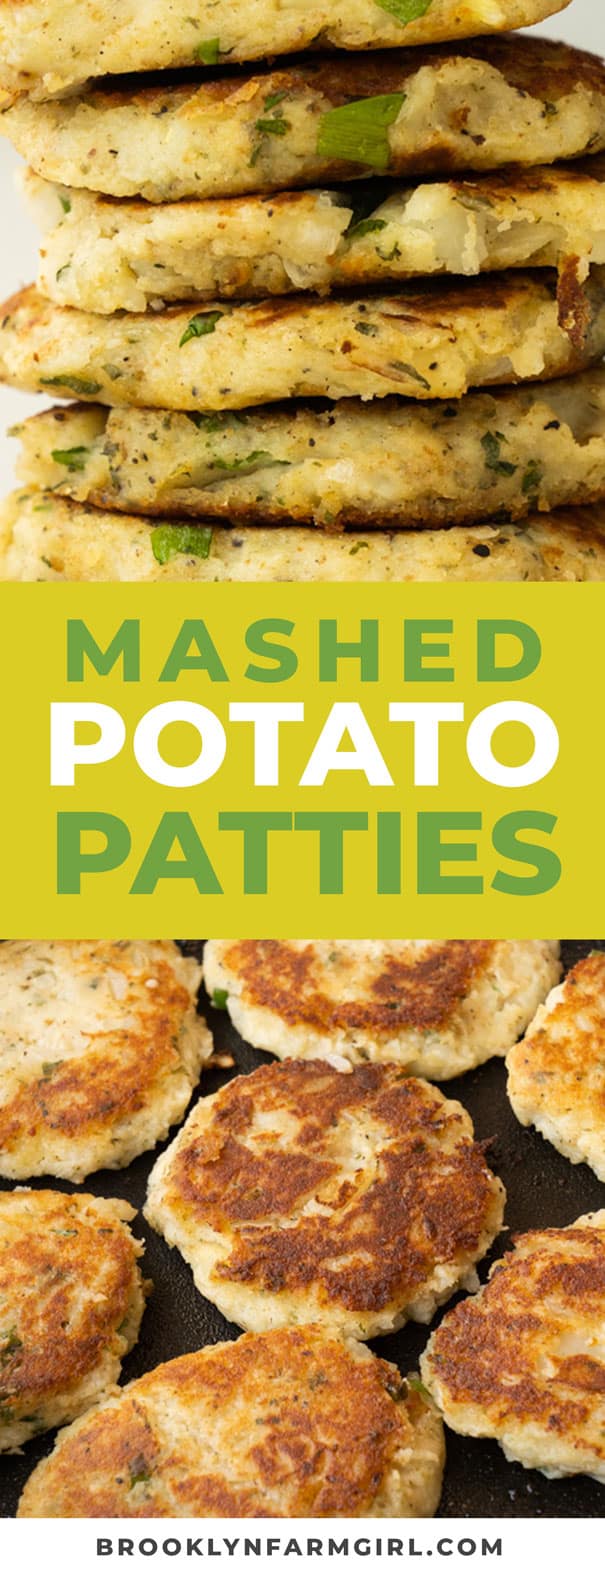 These delicious, savory Mashed Potato Patties are crispy on the outside and soft and creamy on the inside. They’re the best way to use up your leftover mashed potatoes and make for a tasty side dish recipe!